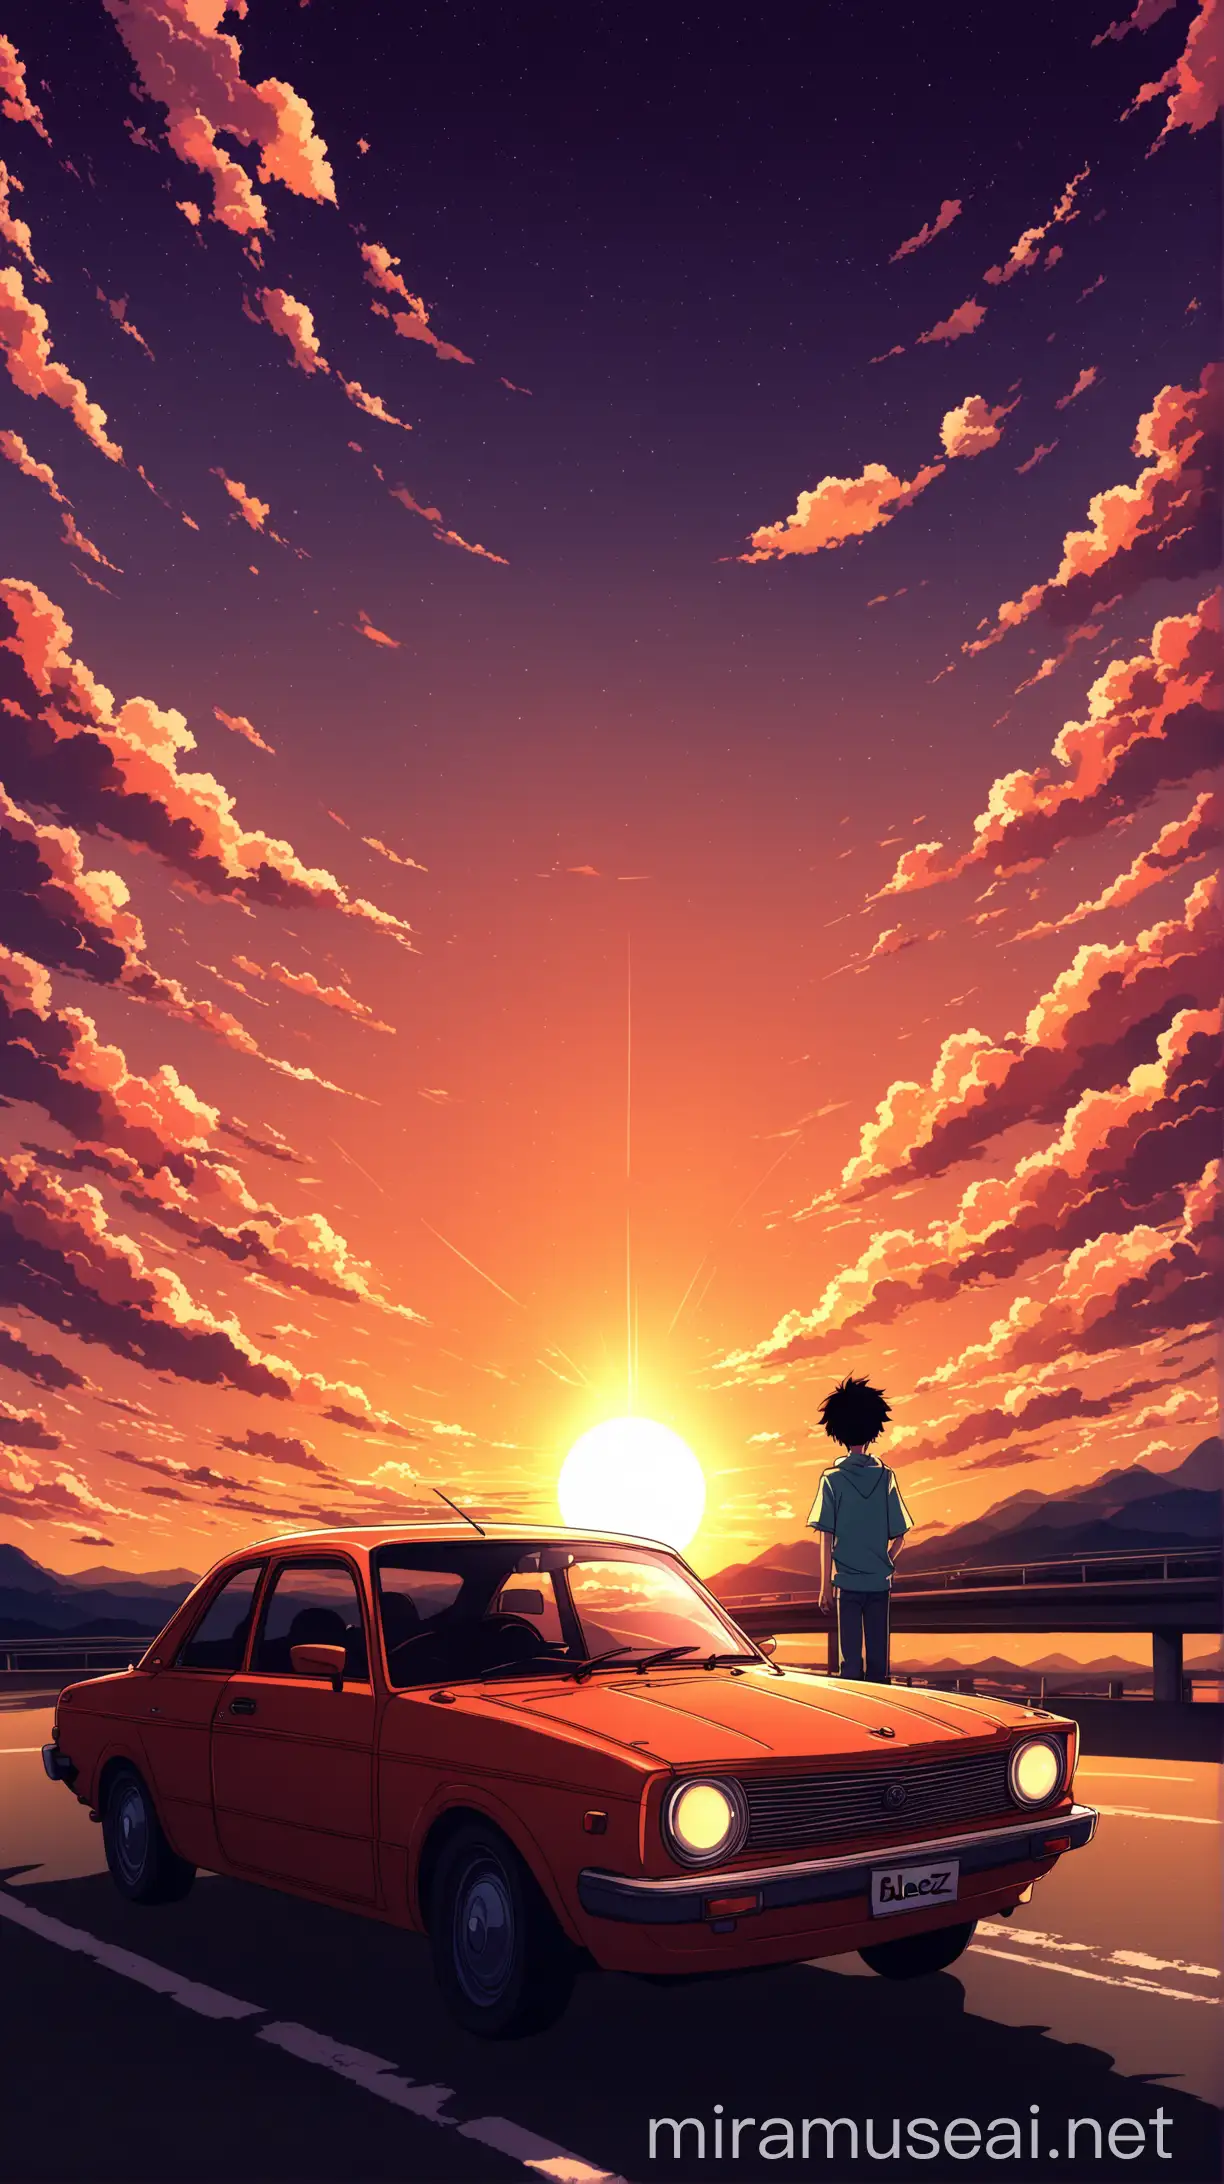 Vector Anime Boy Watching Sunset in Sky with Car and Clouds